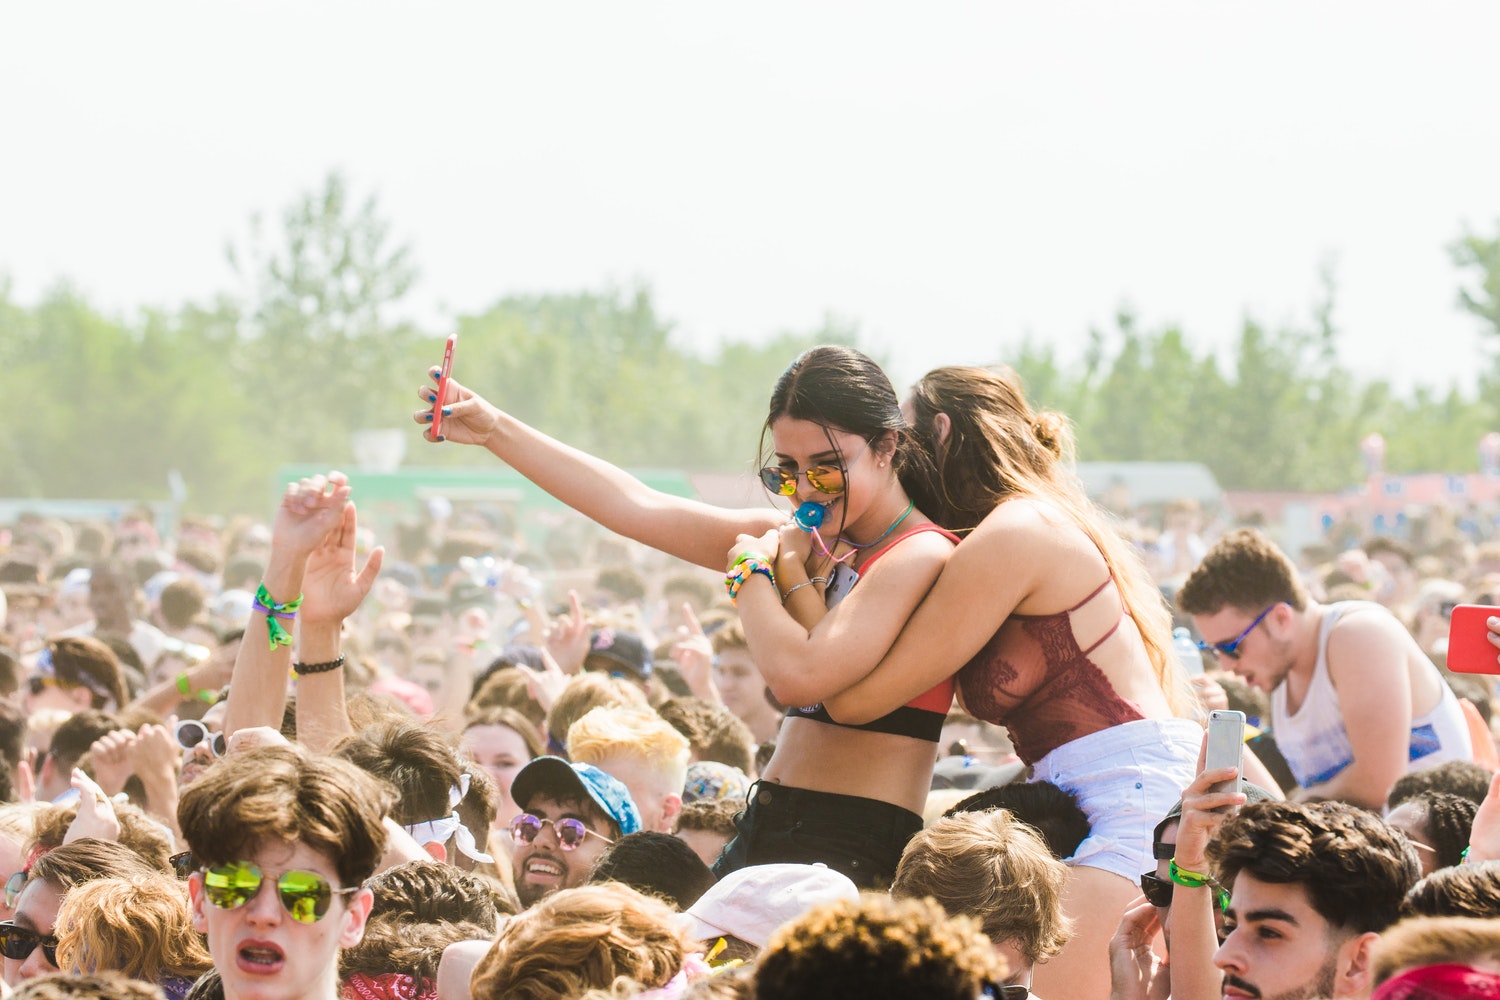 Music Festival Outfits: What To Wear At a Music Festival - FUNBOY